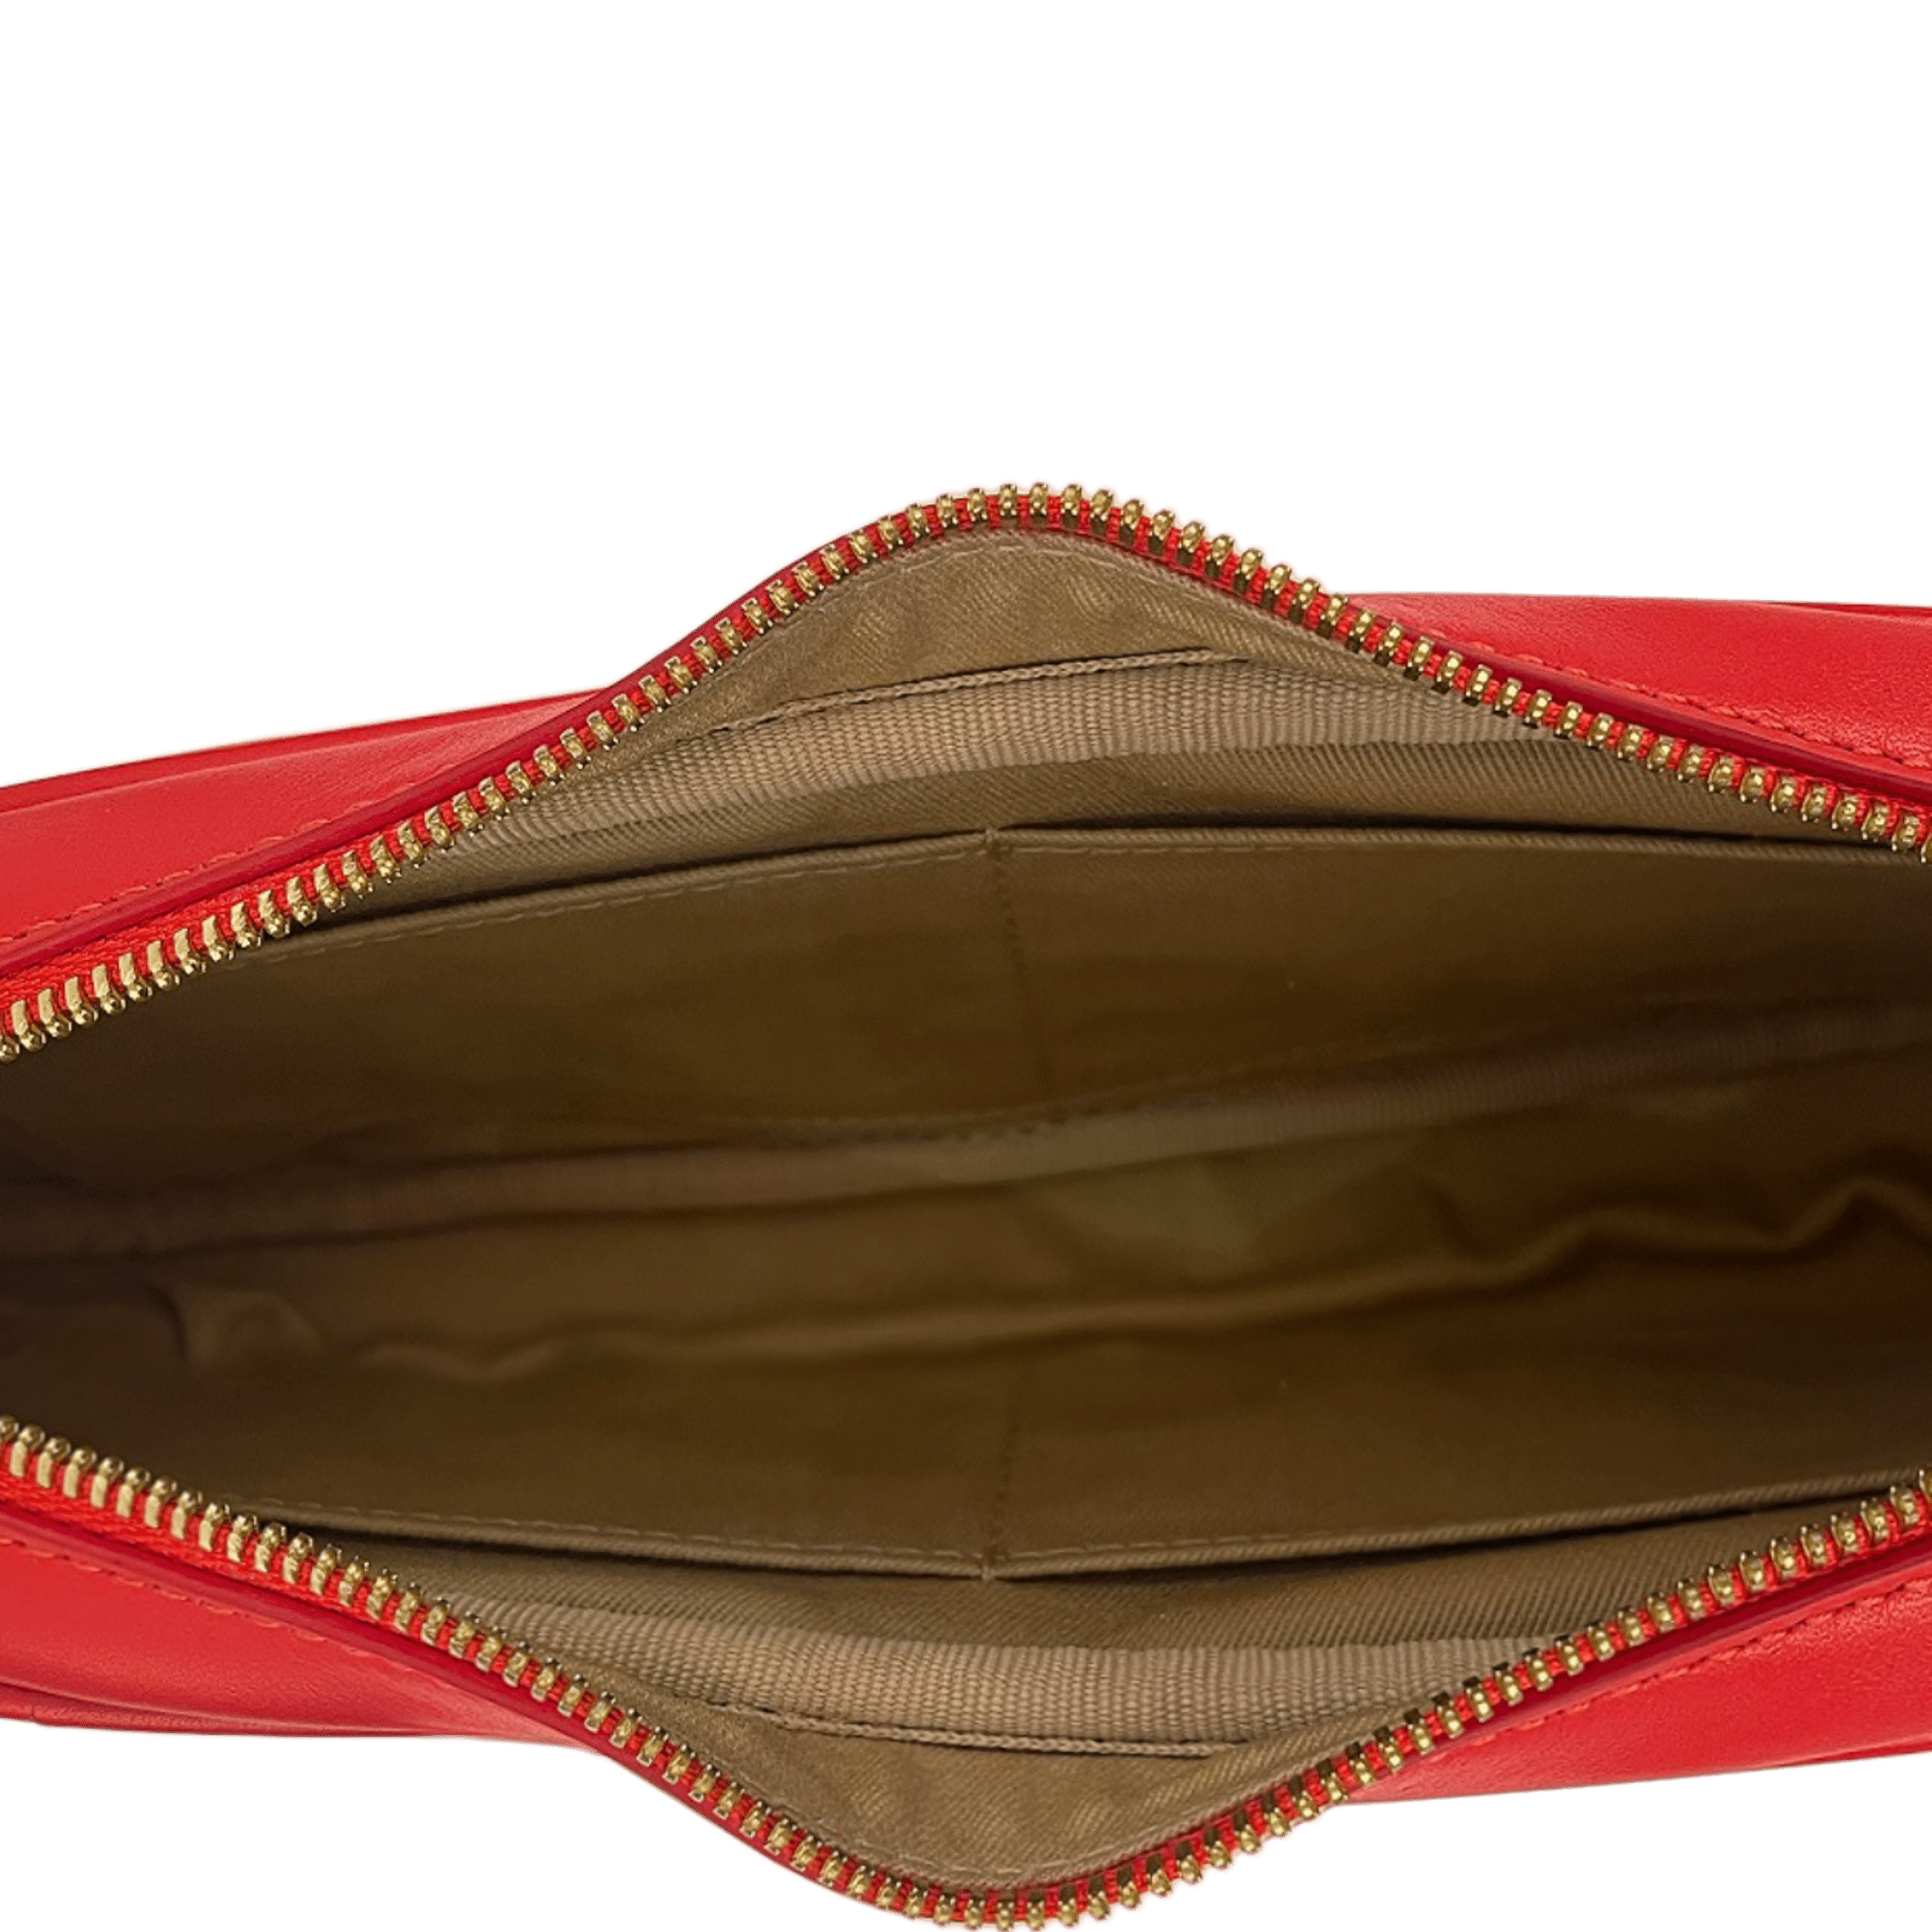 small unique leather clutch red inside